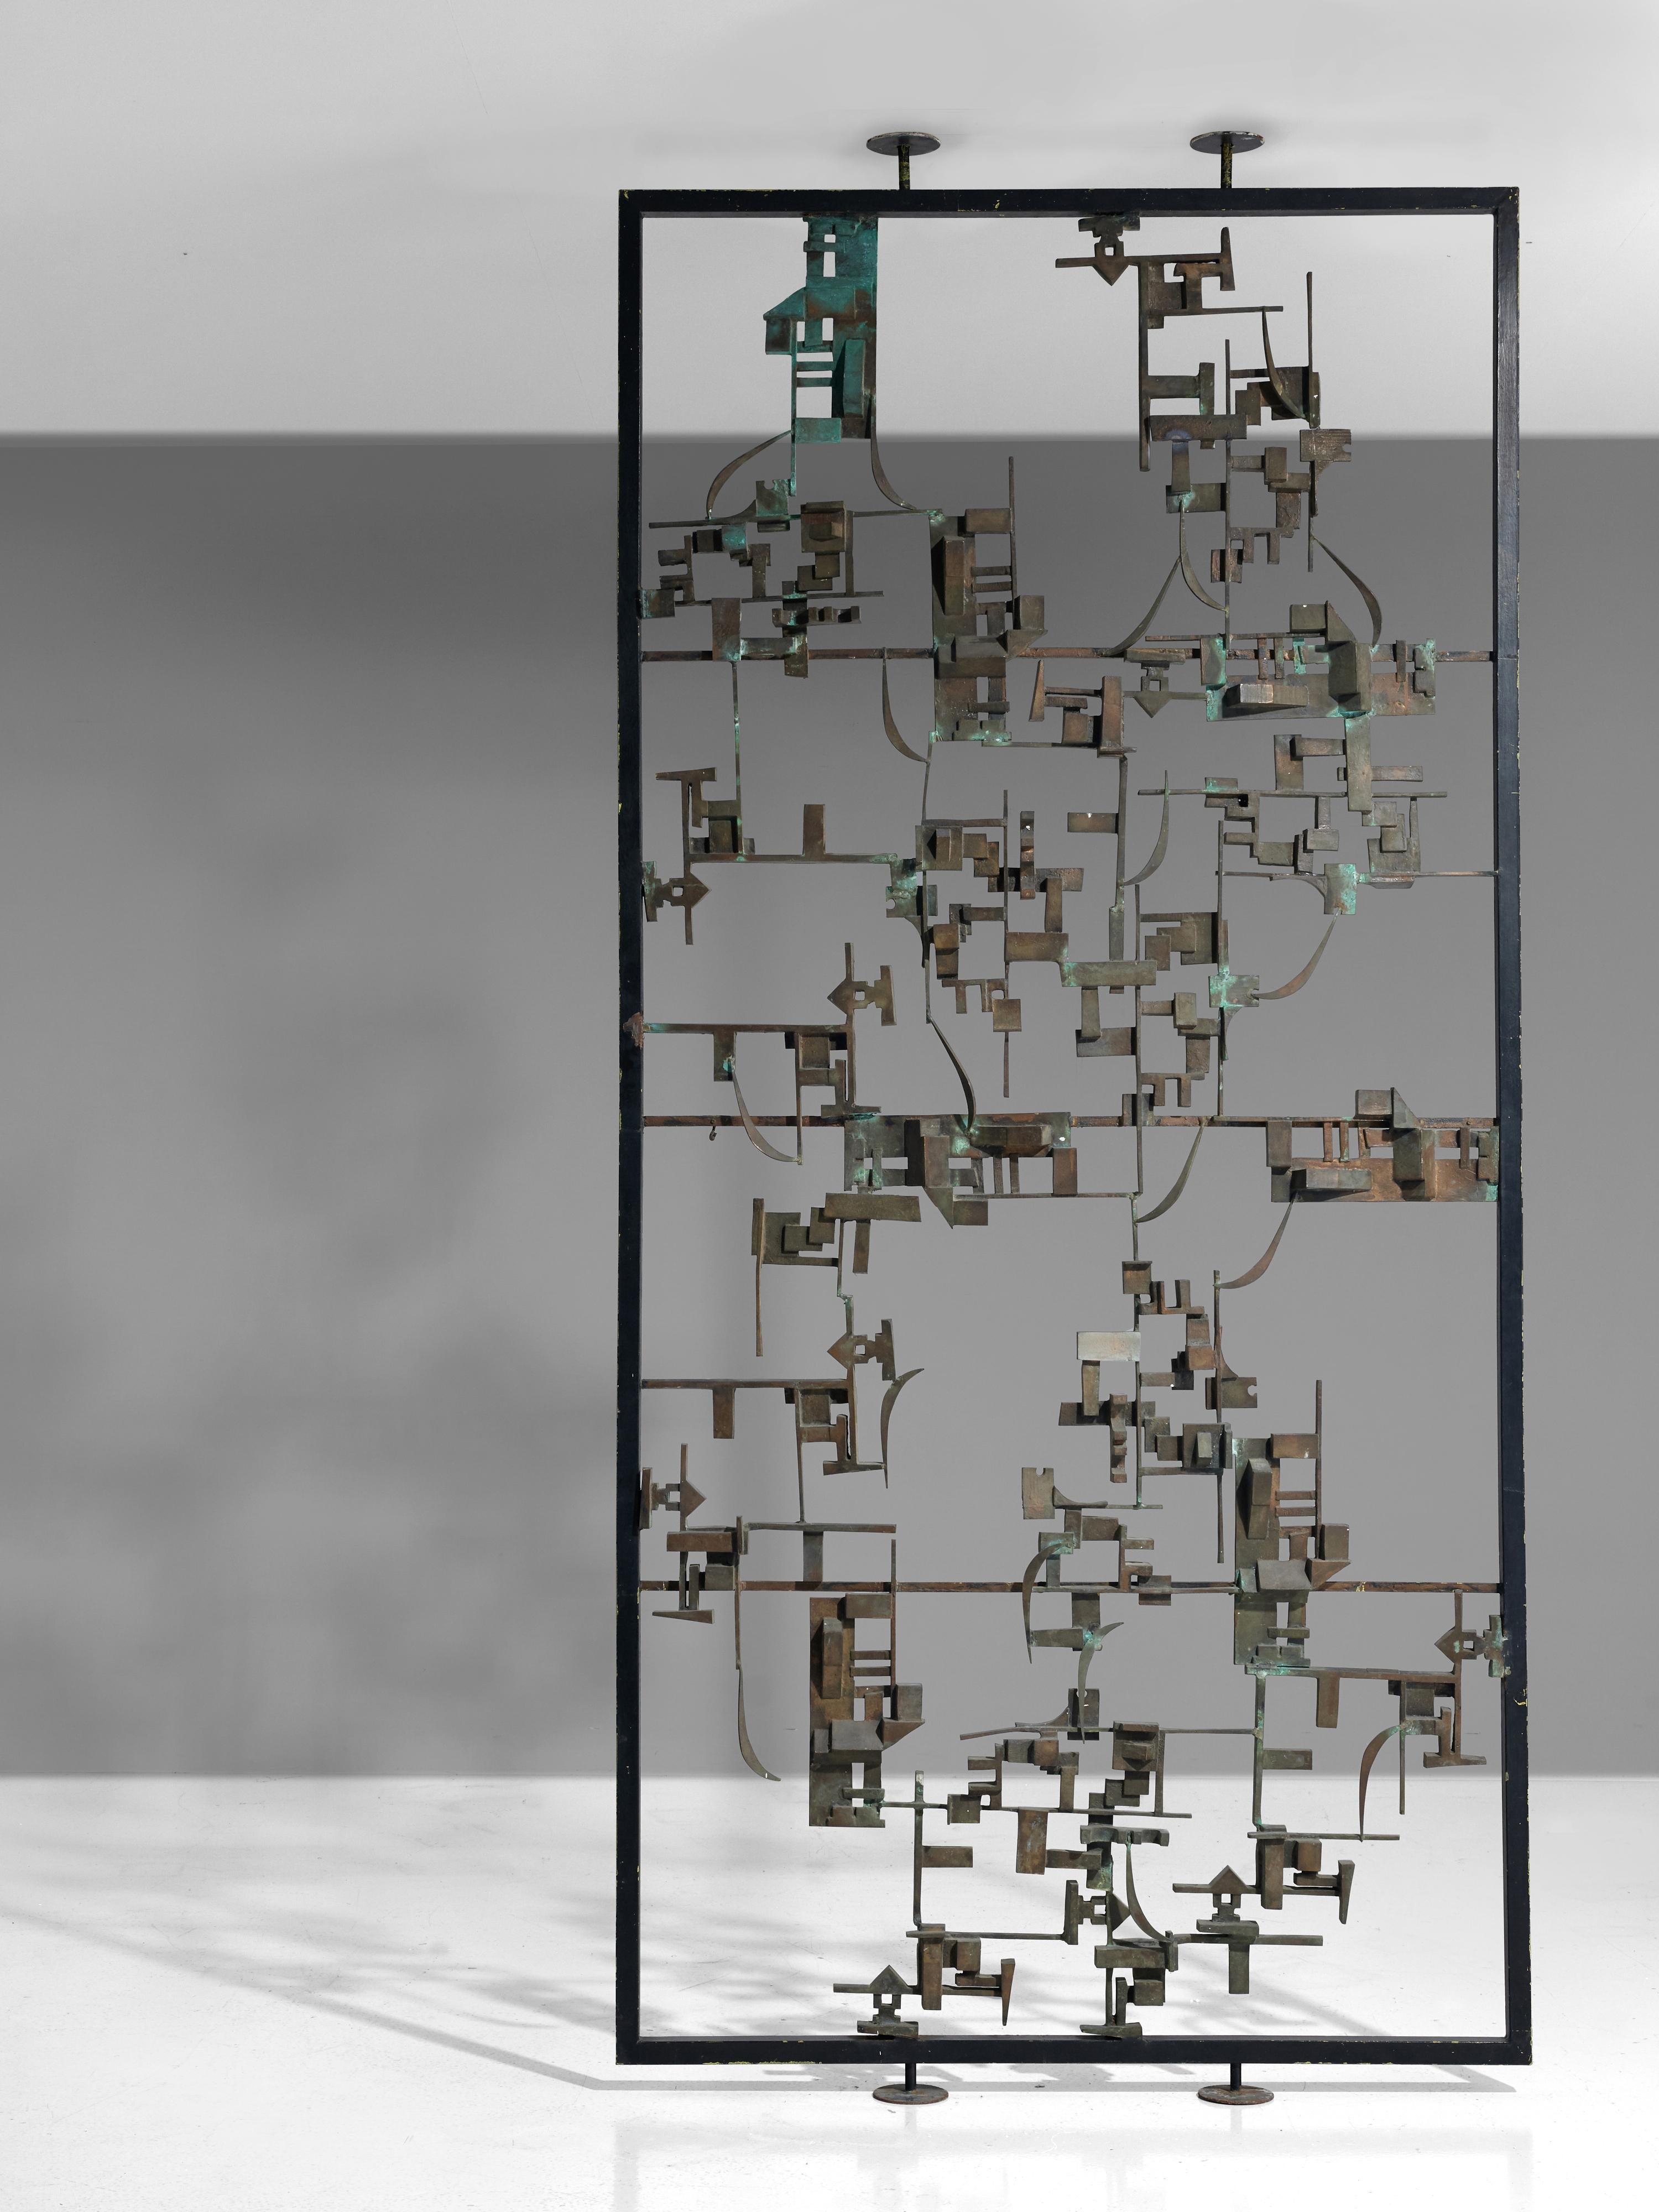 Hand-crafted room divider, bronze, metal, Italy, 1960s.

An Italian Postwar room screen that finds itself at the intersection of art and design. This highly sculptural piece consists of an abstract structure in bronze with abstract shapes and